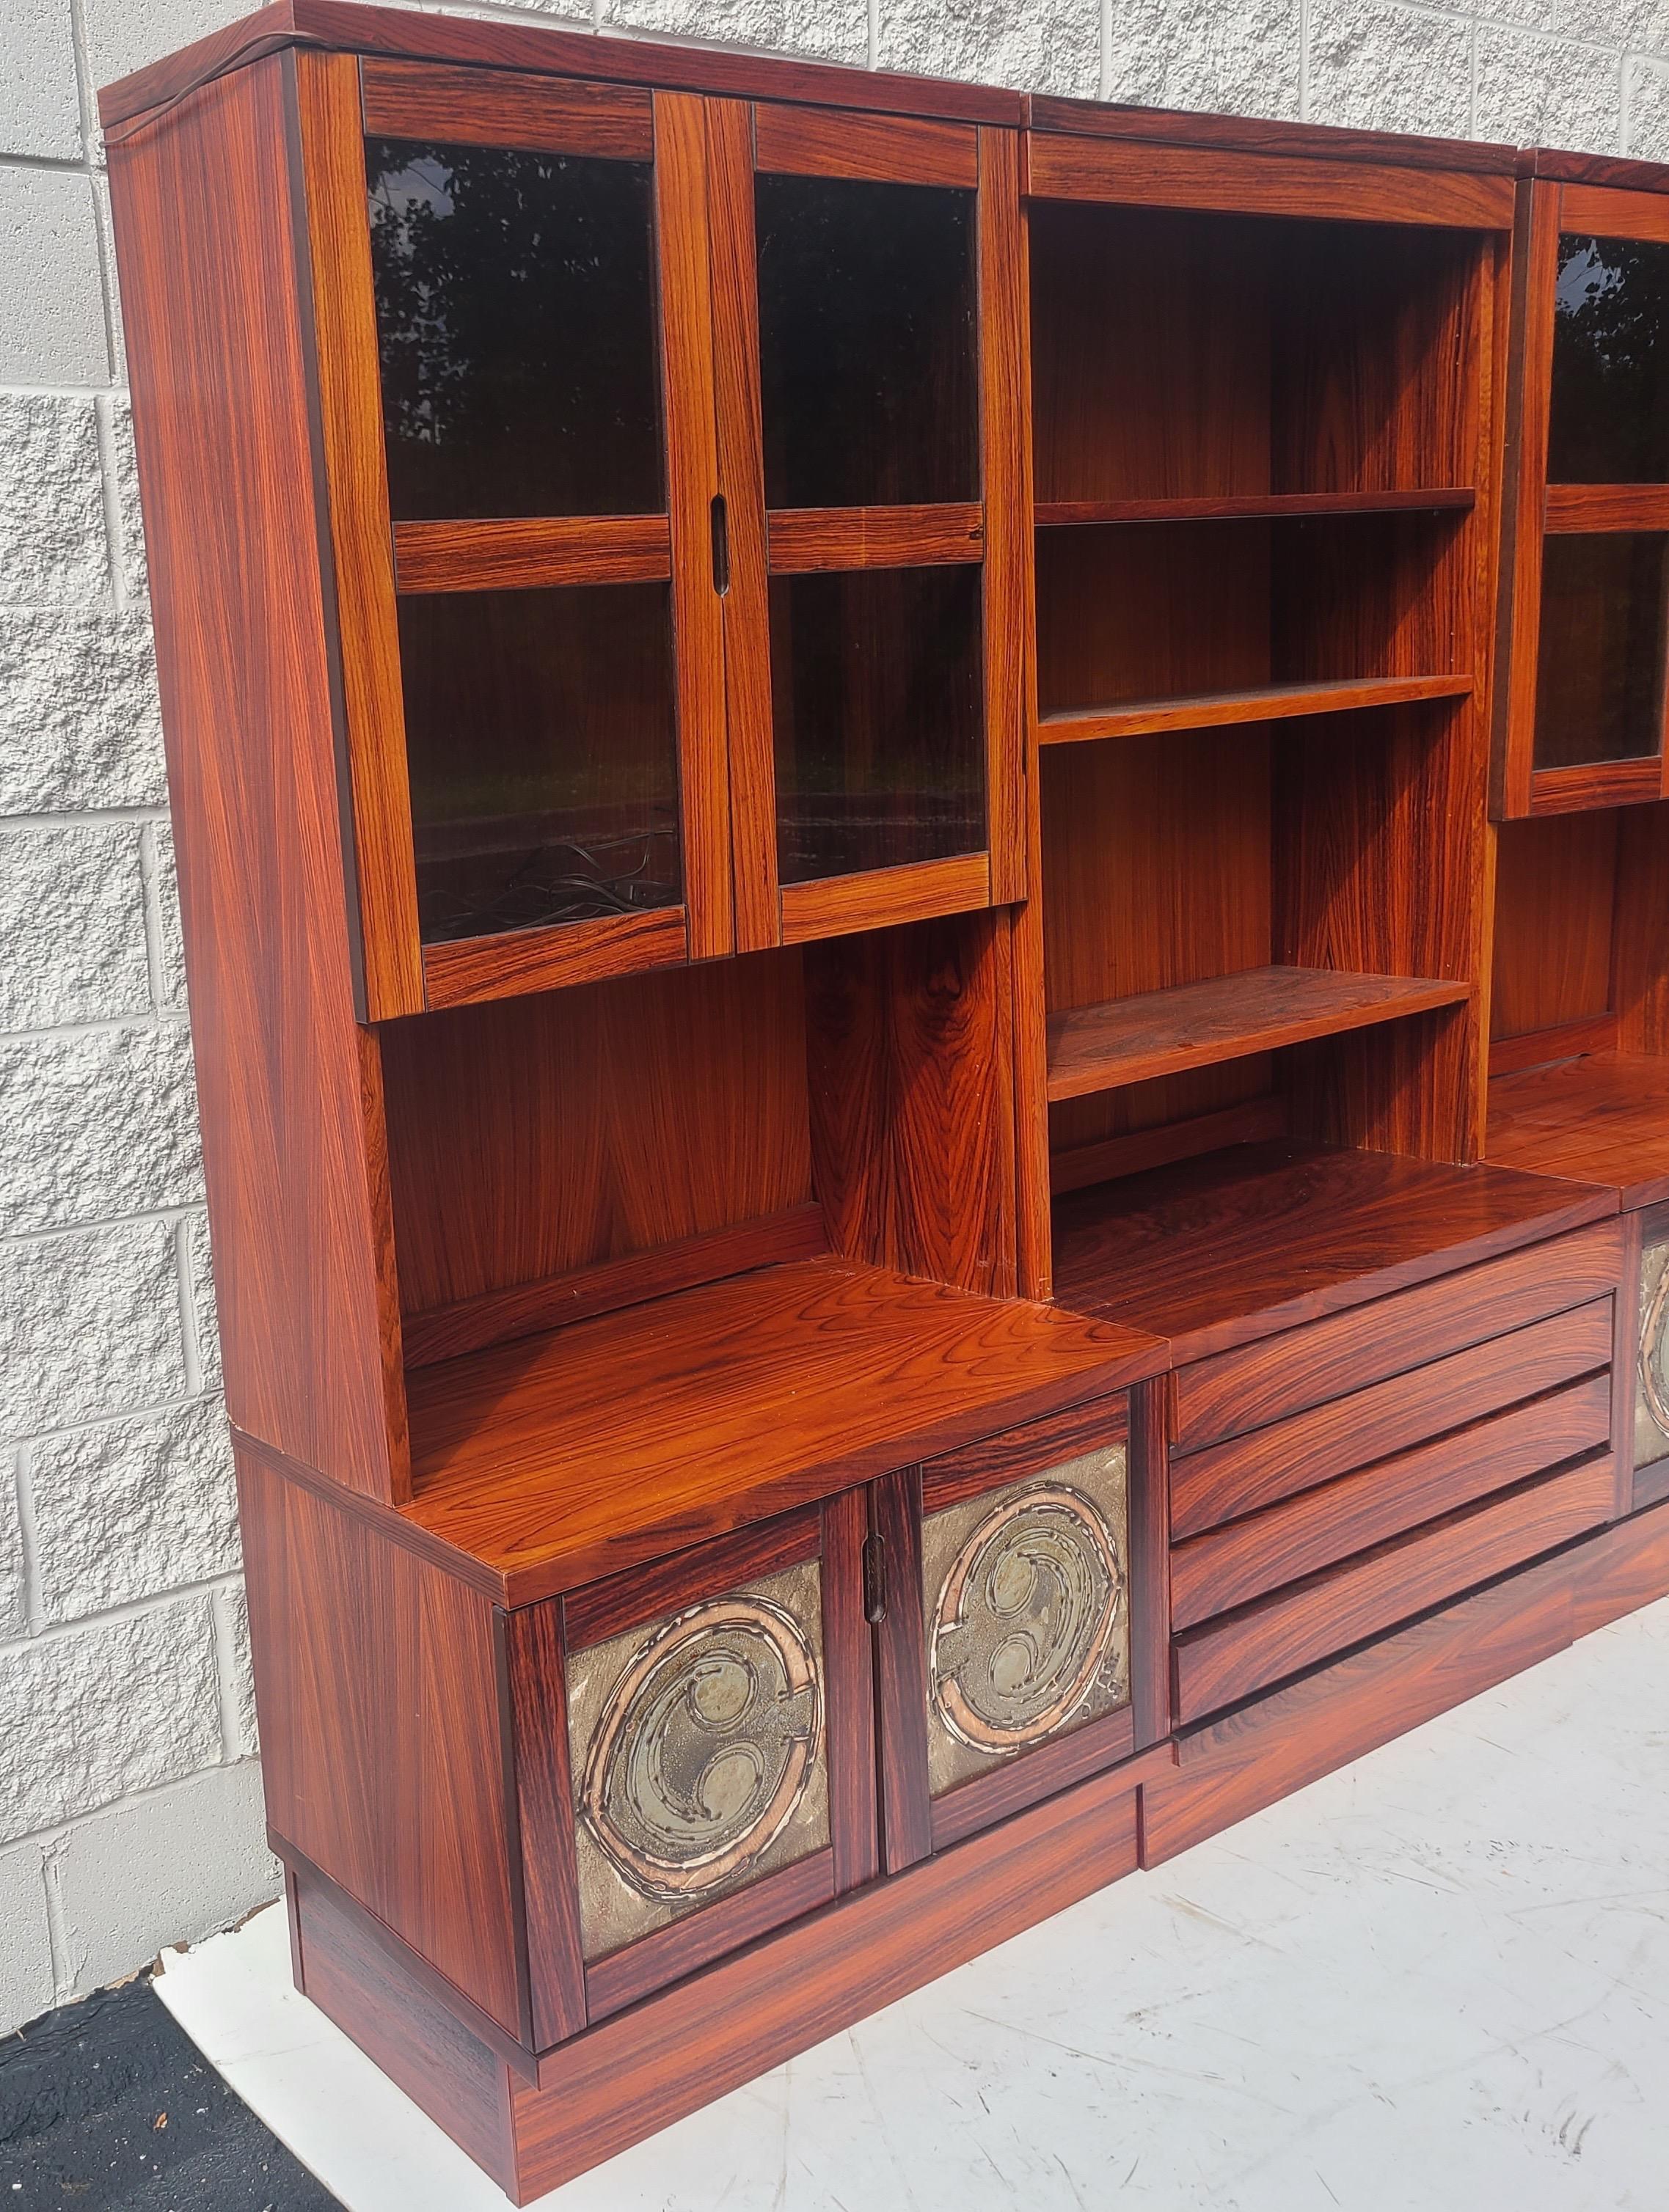 Rosewood Wall Unit. Made in Denmark. Has ceramic panels in lower
Doors which say Ox Art '78. Lower cabinets have mahogany shelved. 
Upper cabinets have a glass shelves behind glass doors. Center cabinet
Lower has drawers.

    